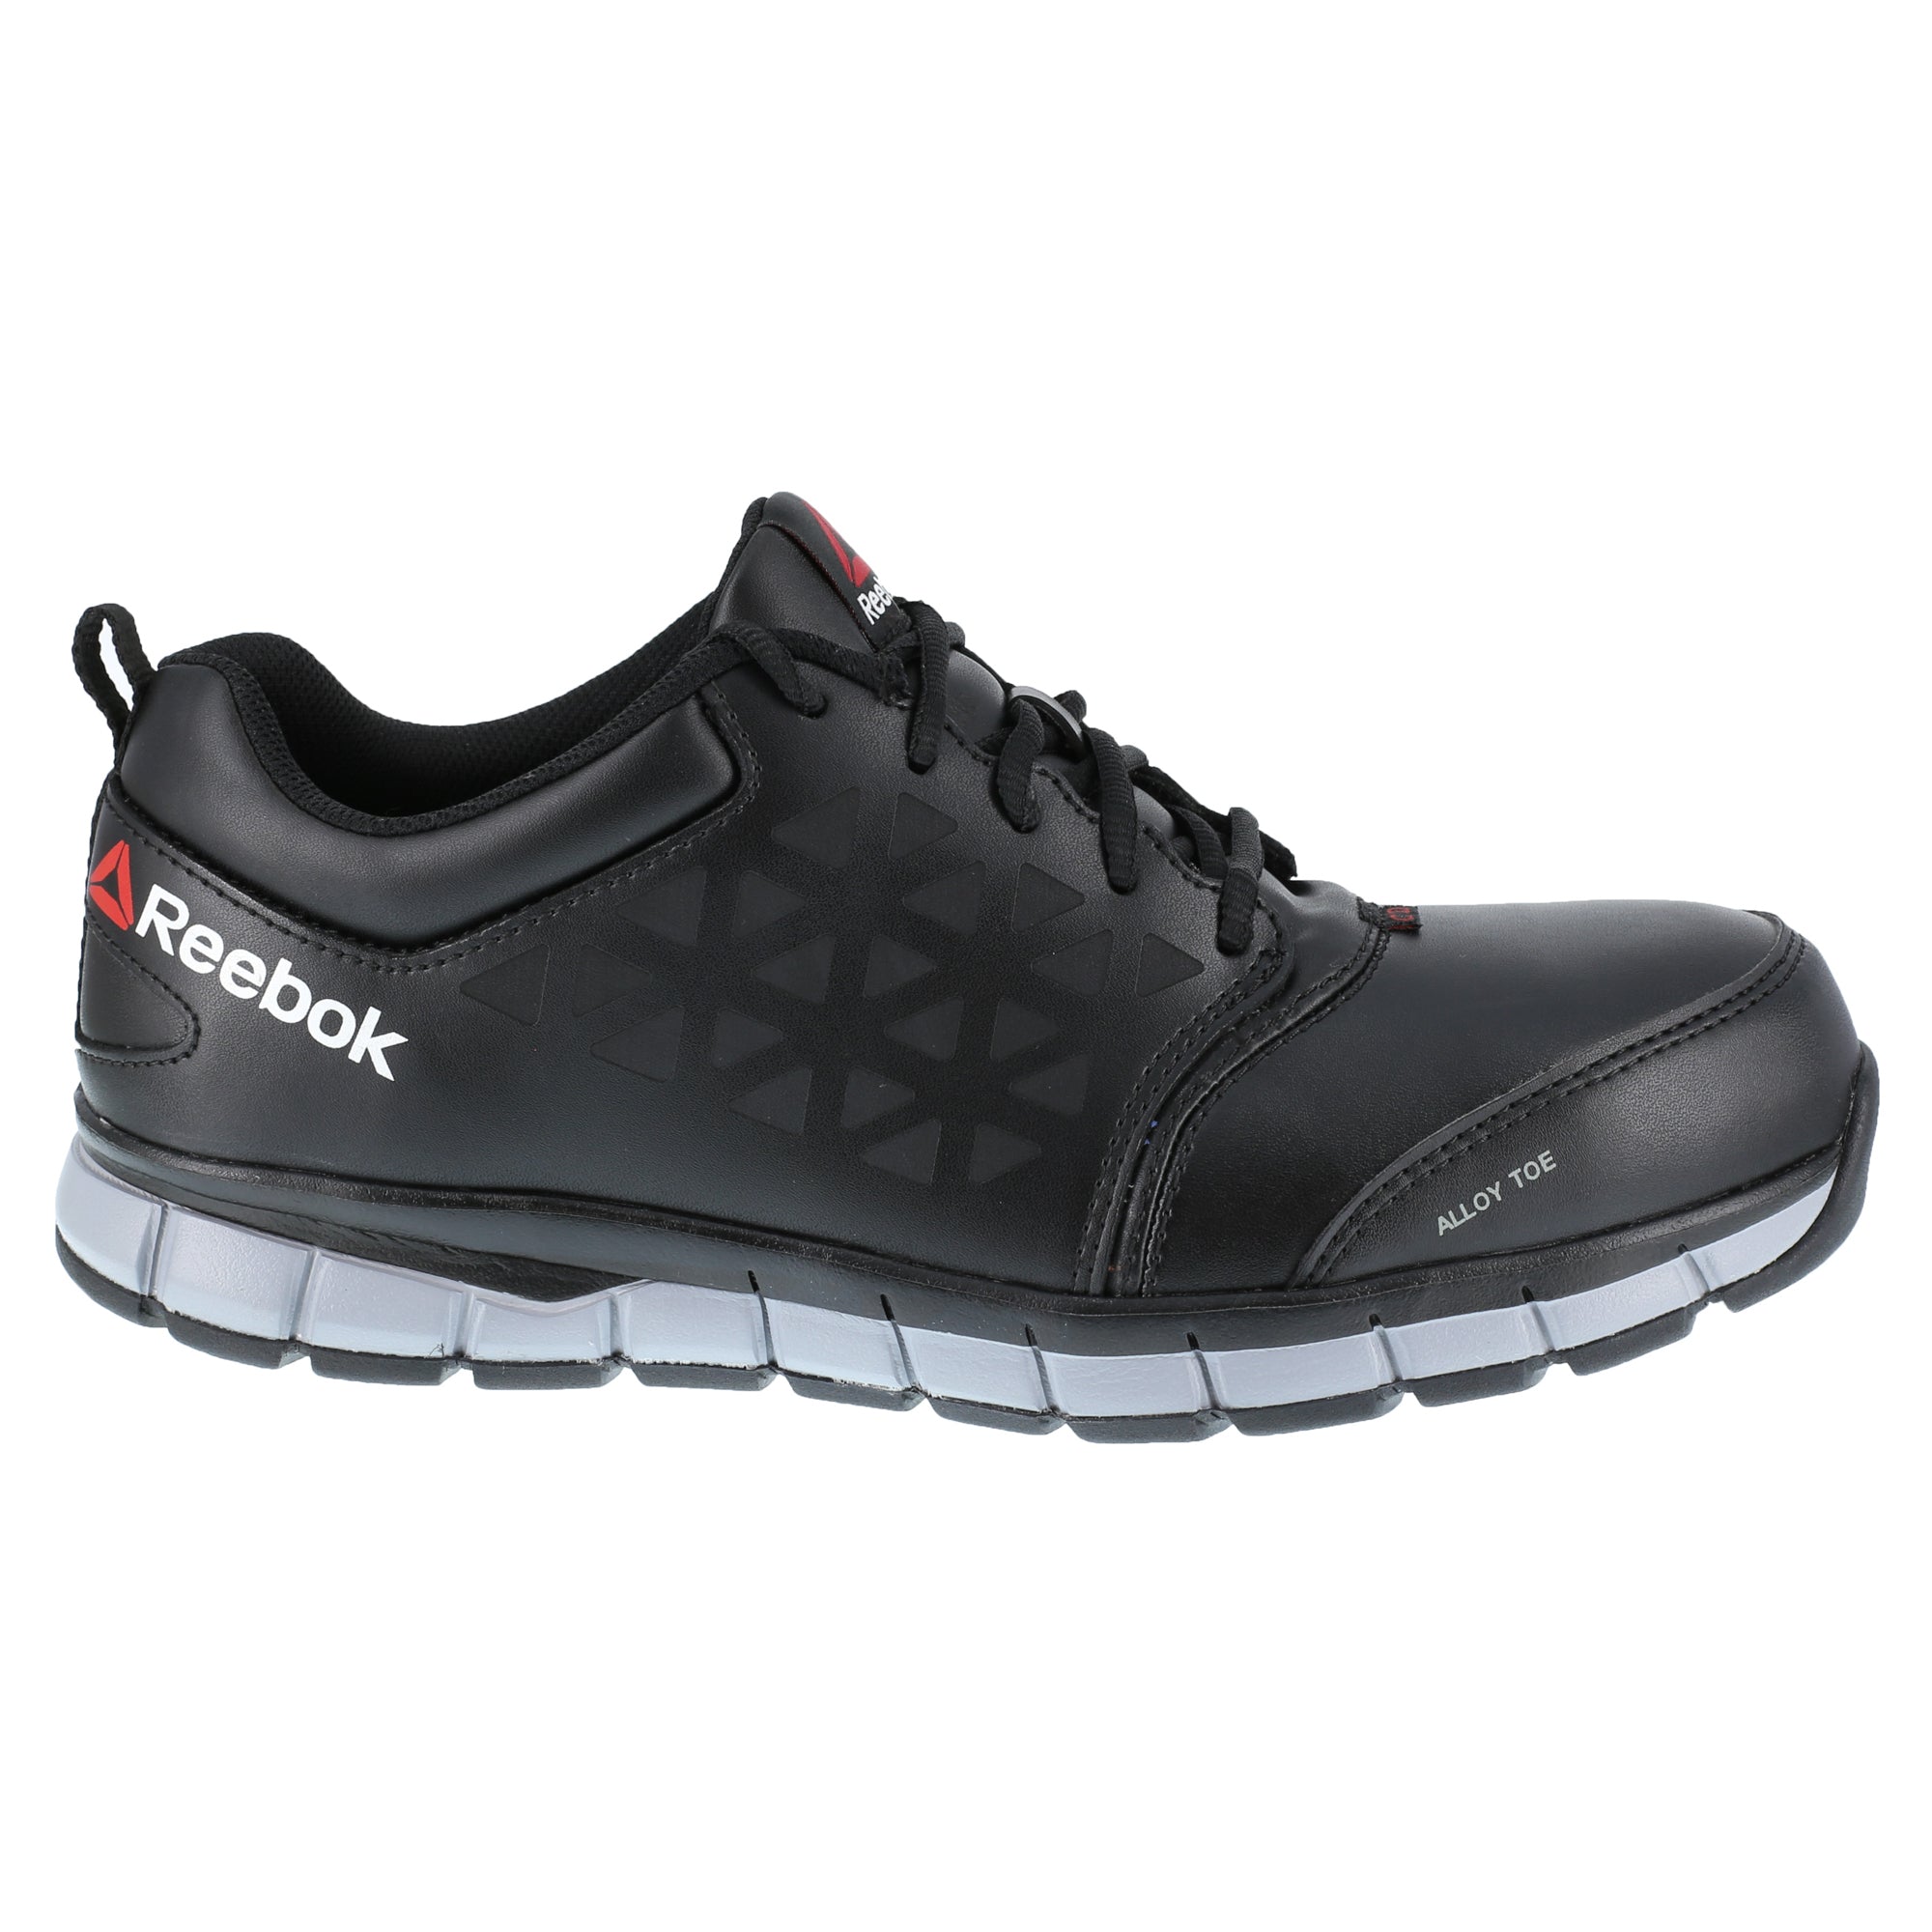 Reebok Womens Black Leather Work Shoes Conductive Athletic – The Company